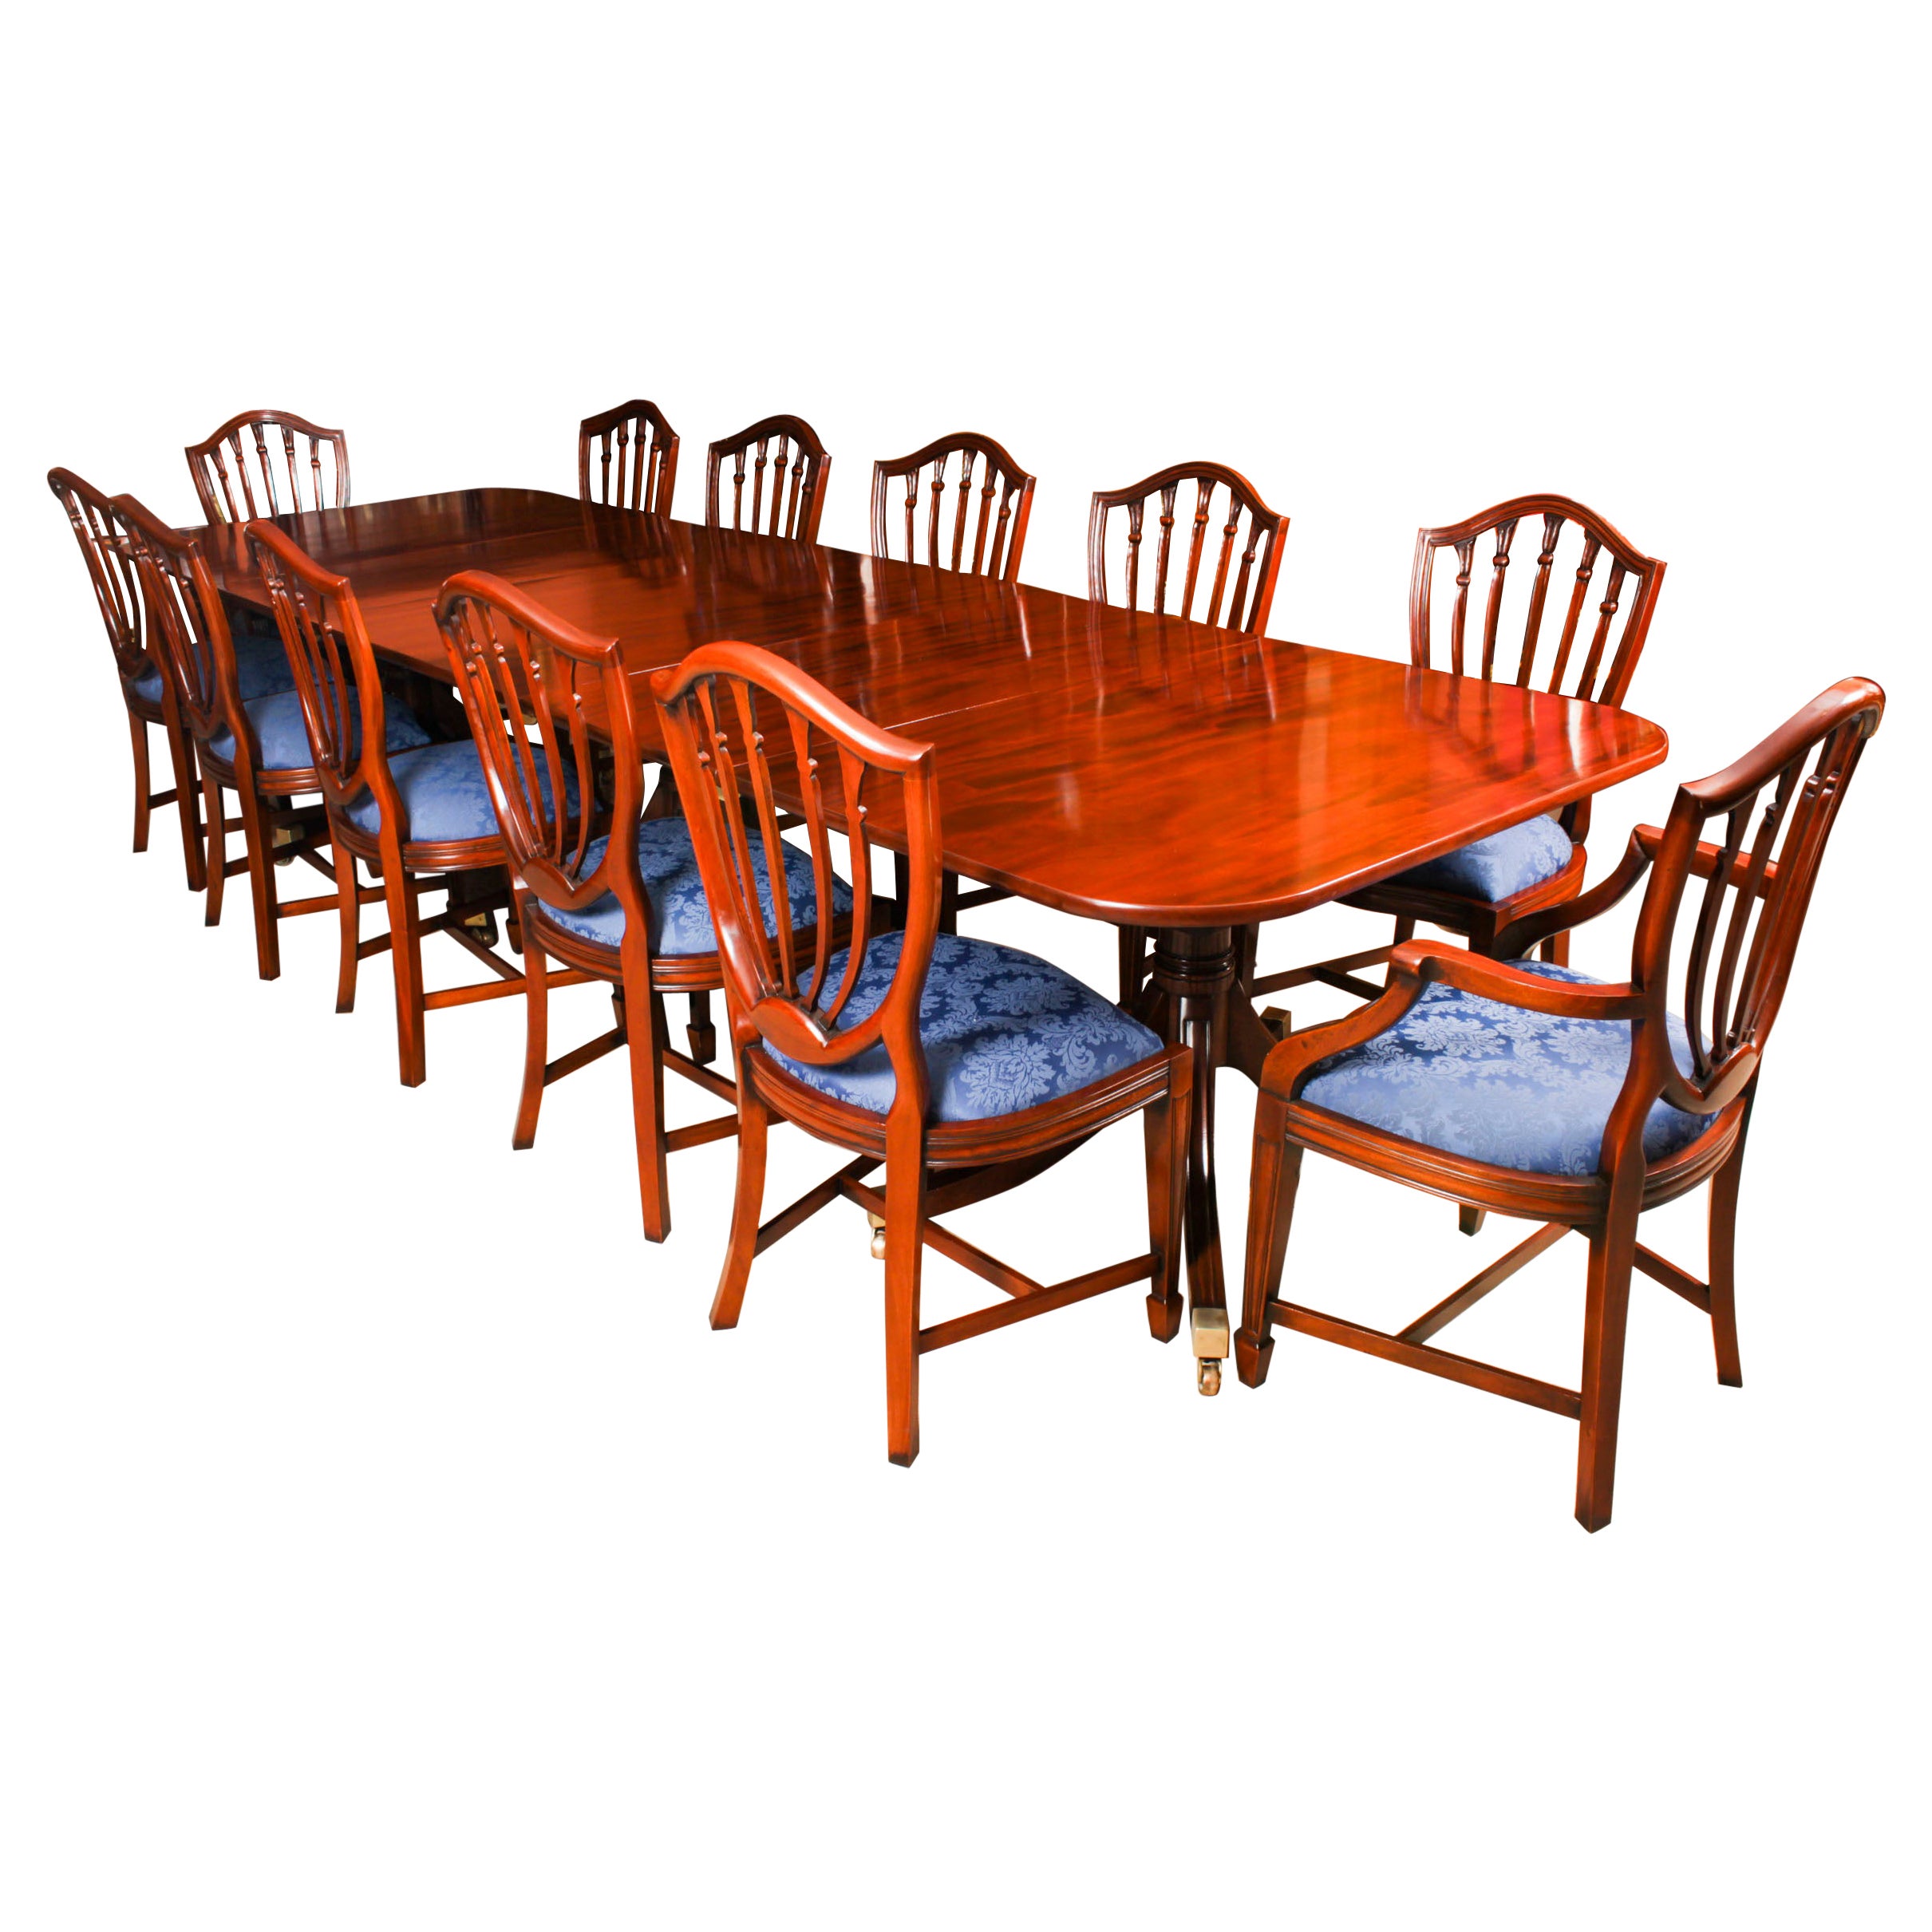 Antique 12ft Regency Triple Pillar Dining Table & 12 Chairs 19th Century For Sale